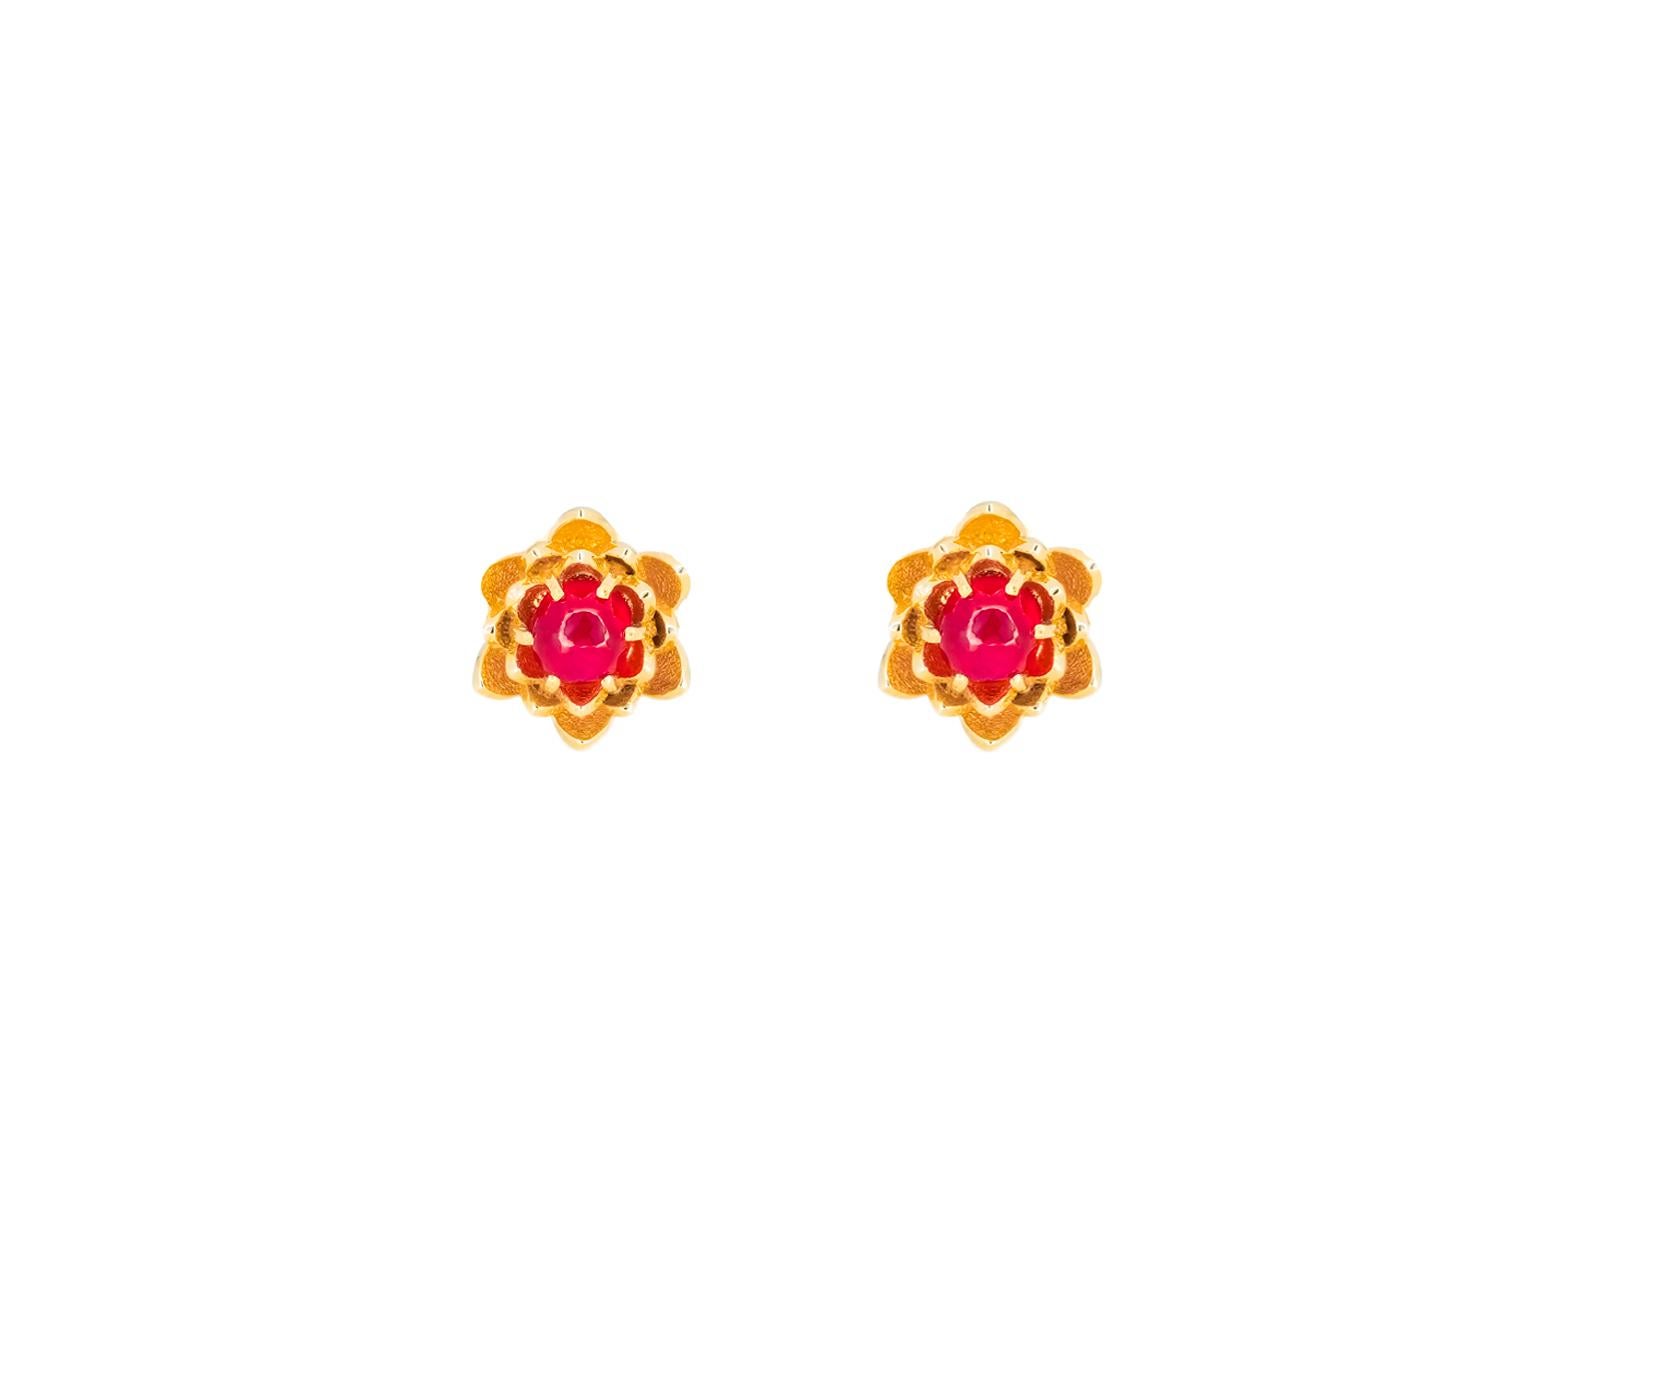 3 pair of earrings studs:  Fish, crab and flower  7